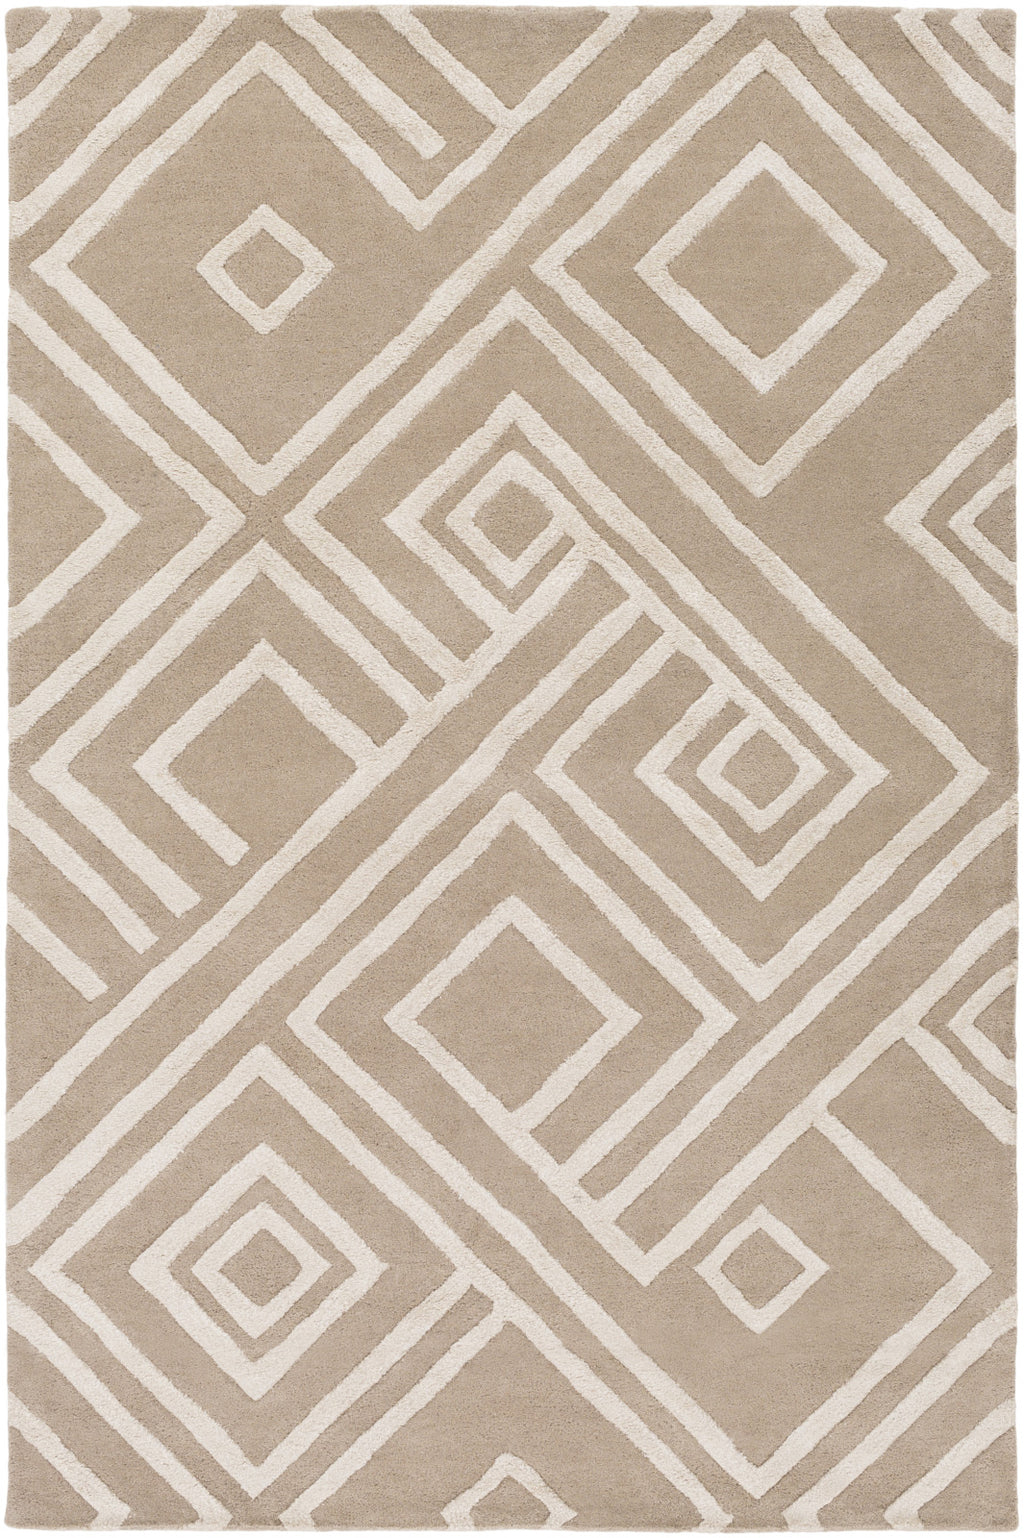 Chamber CHB-1013 White Hand Tufted Area Rug by Surya